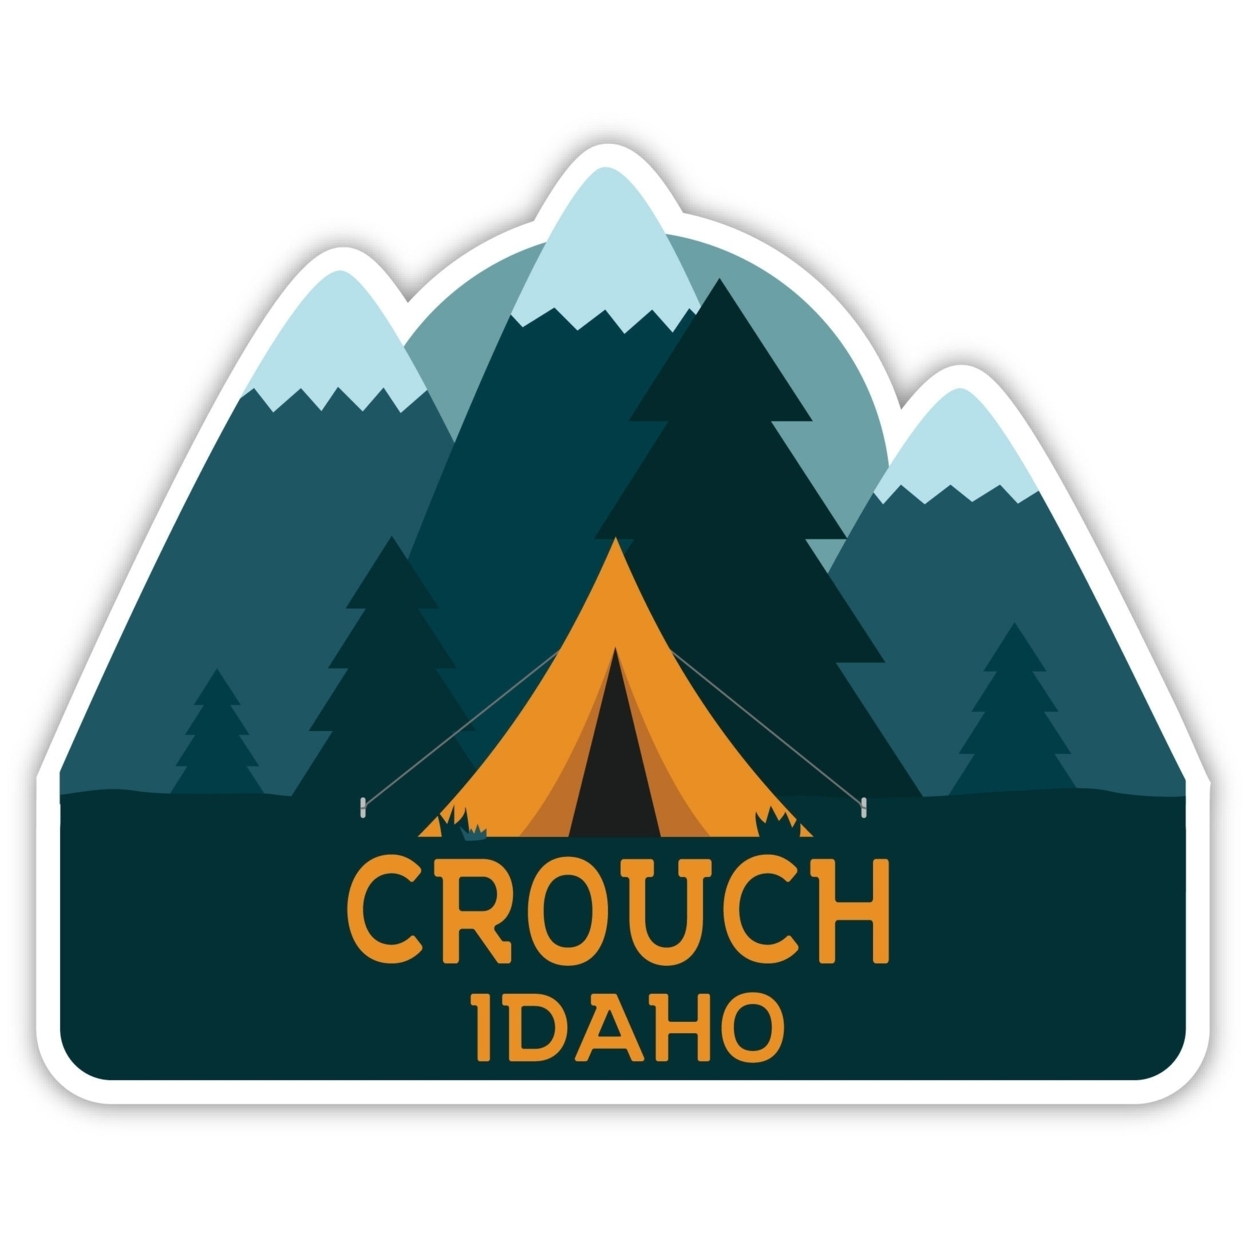 Crouch Idaho Souvenir Decorative Stickers (Choose Theme And Size) - 4-Pack, 2-Inch, Tent